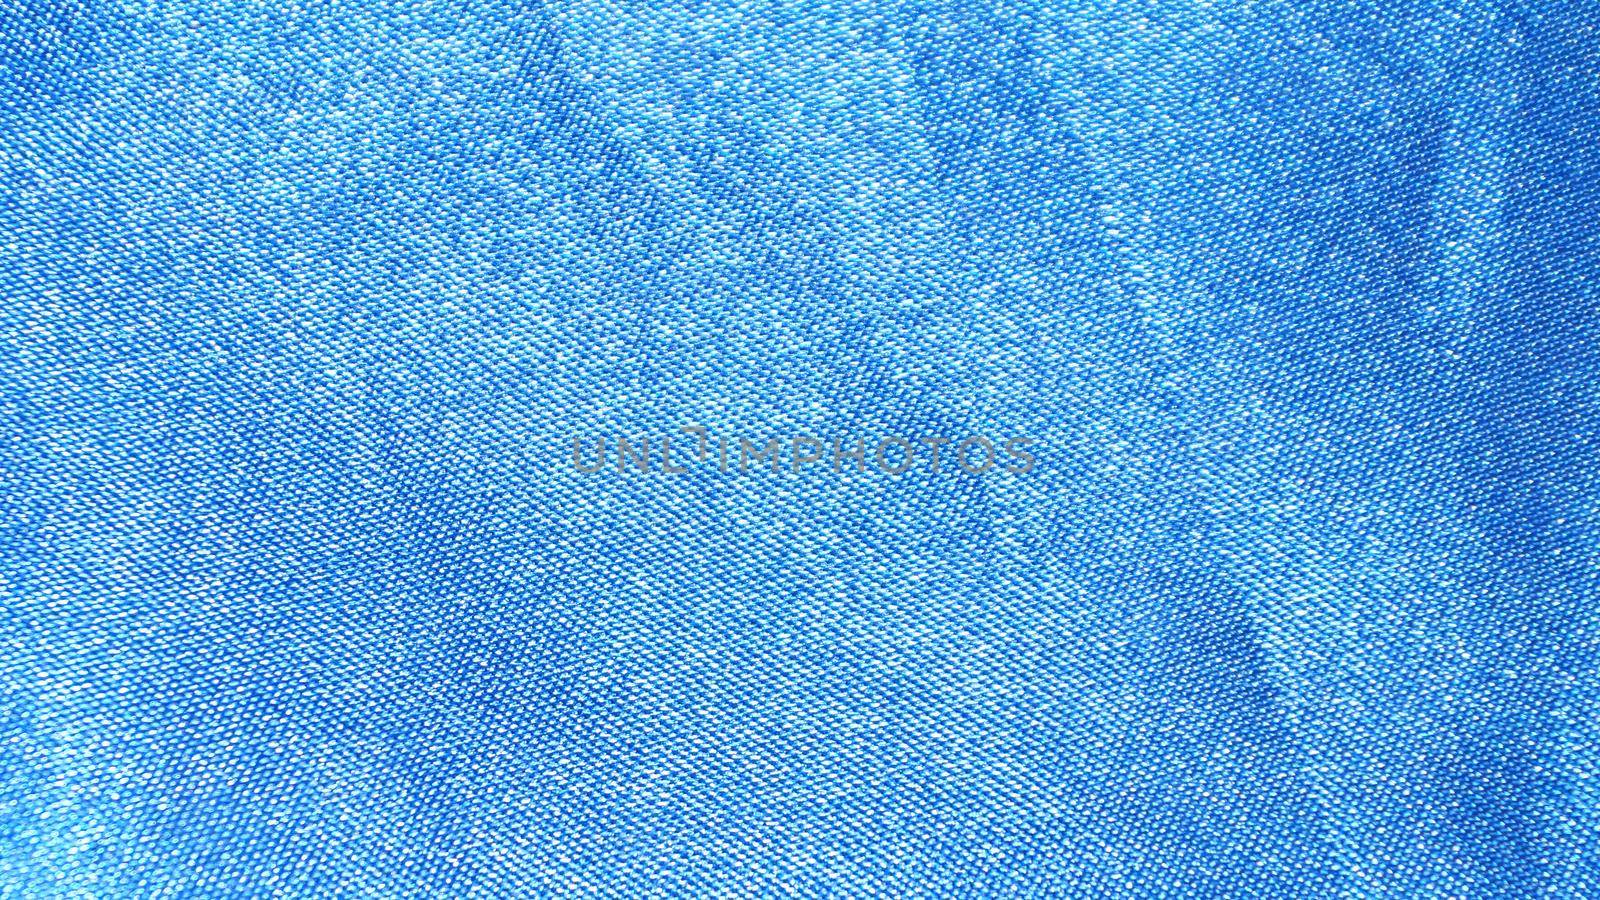 blue fabric texture for textile background close-up.